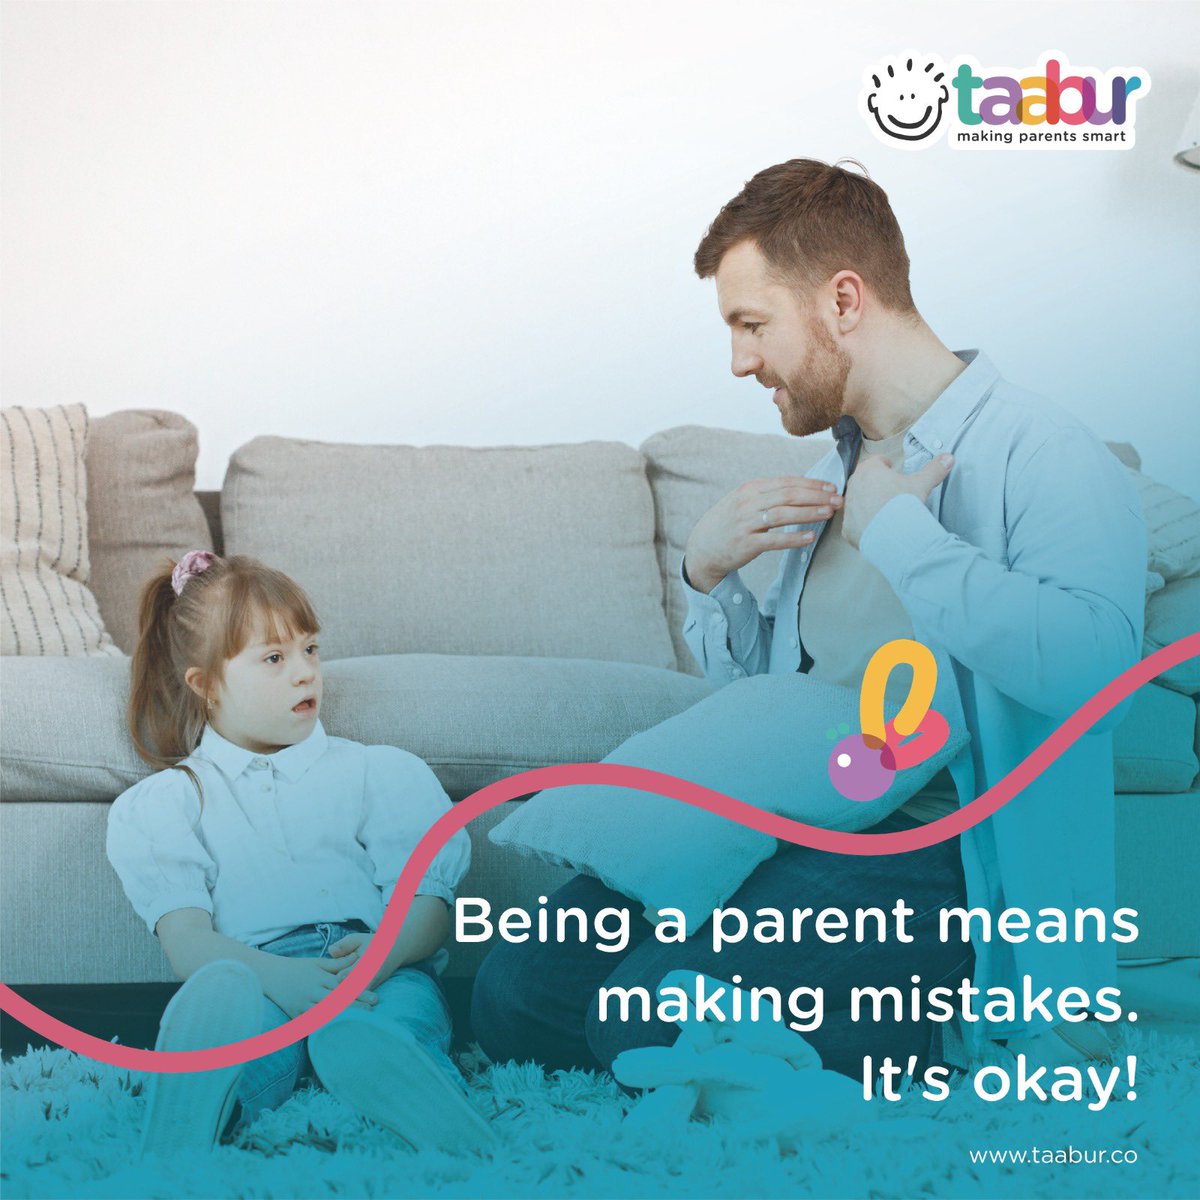 Don't beat yourself up about them. It's alright to make mistakes. Learn and move on. Teach your children to do the same. 

#parentingtips #parentingtips101 #positiveparentingtips #goodparenting #positiveparenting #taabur #childdevelopment #makingparentssmart #kidsclasses